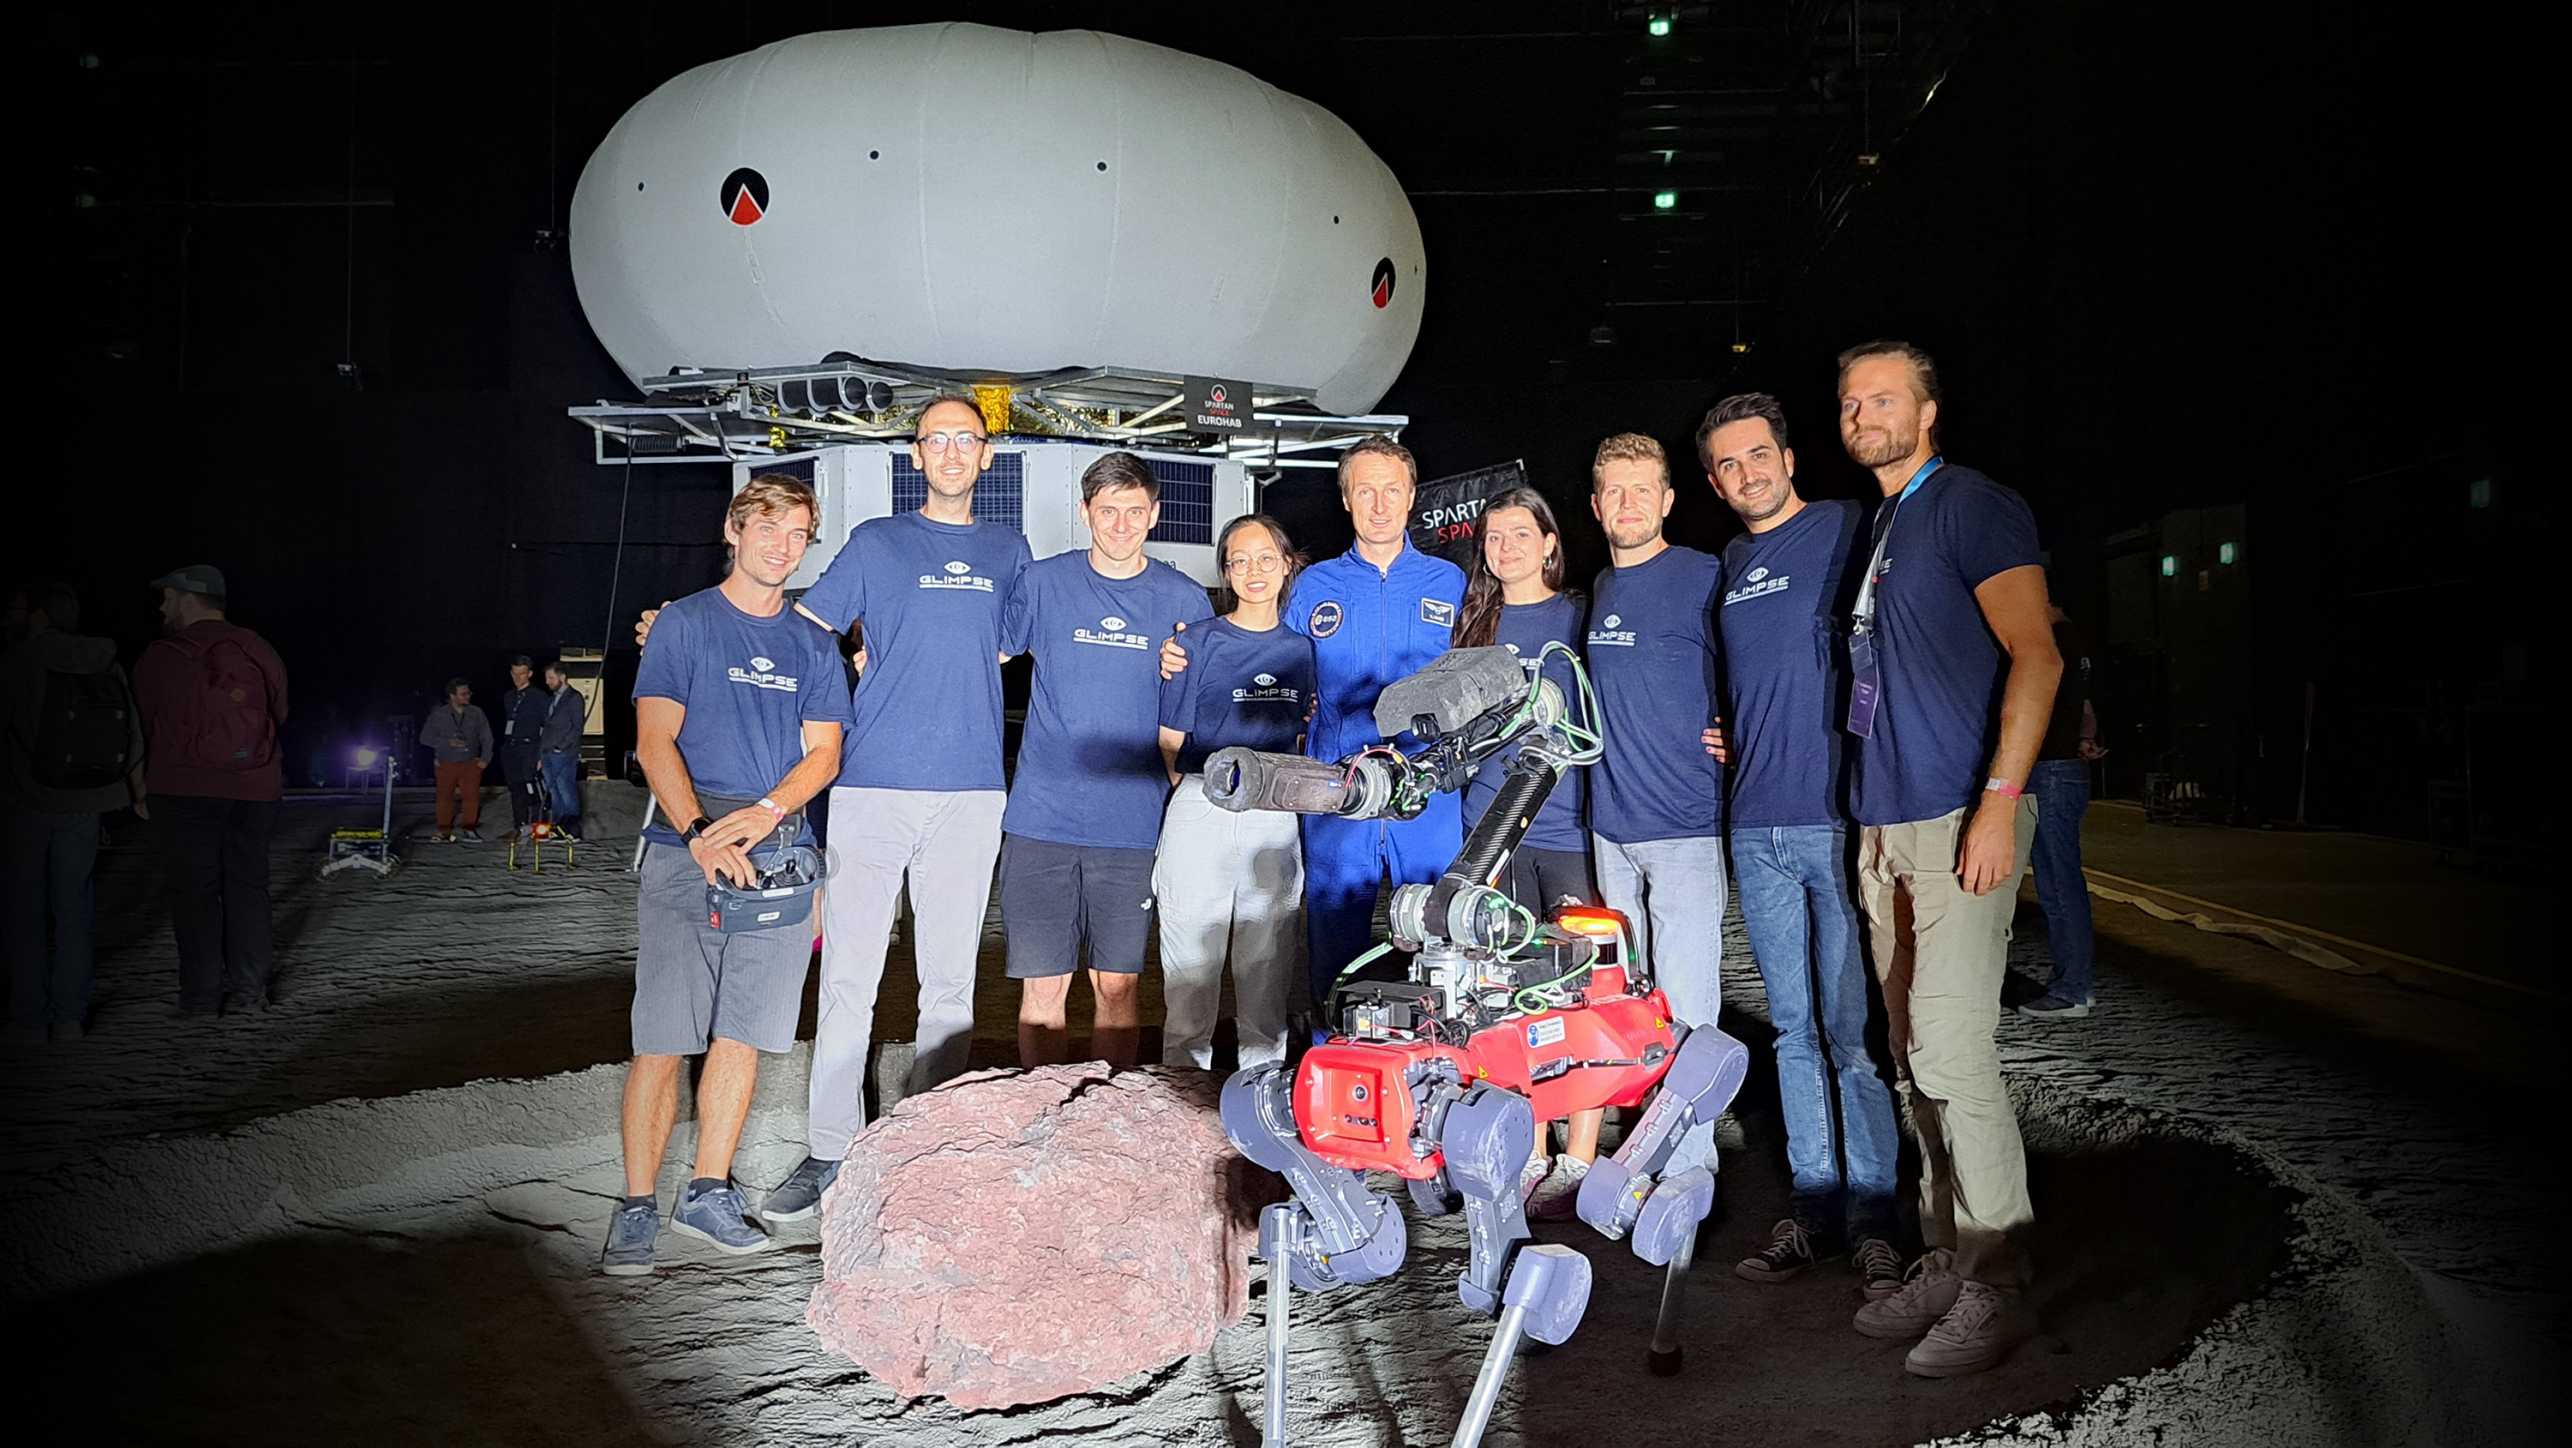 Group photo of the team at night in a gravel pit, with their legged robot in front of them.